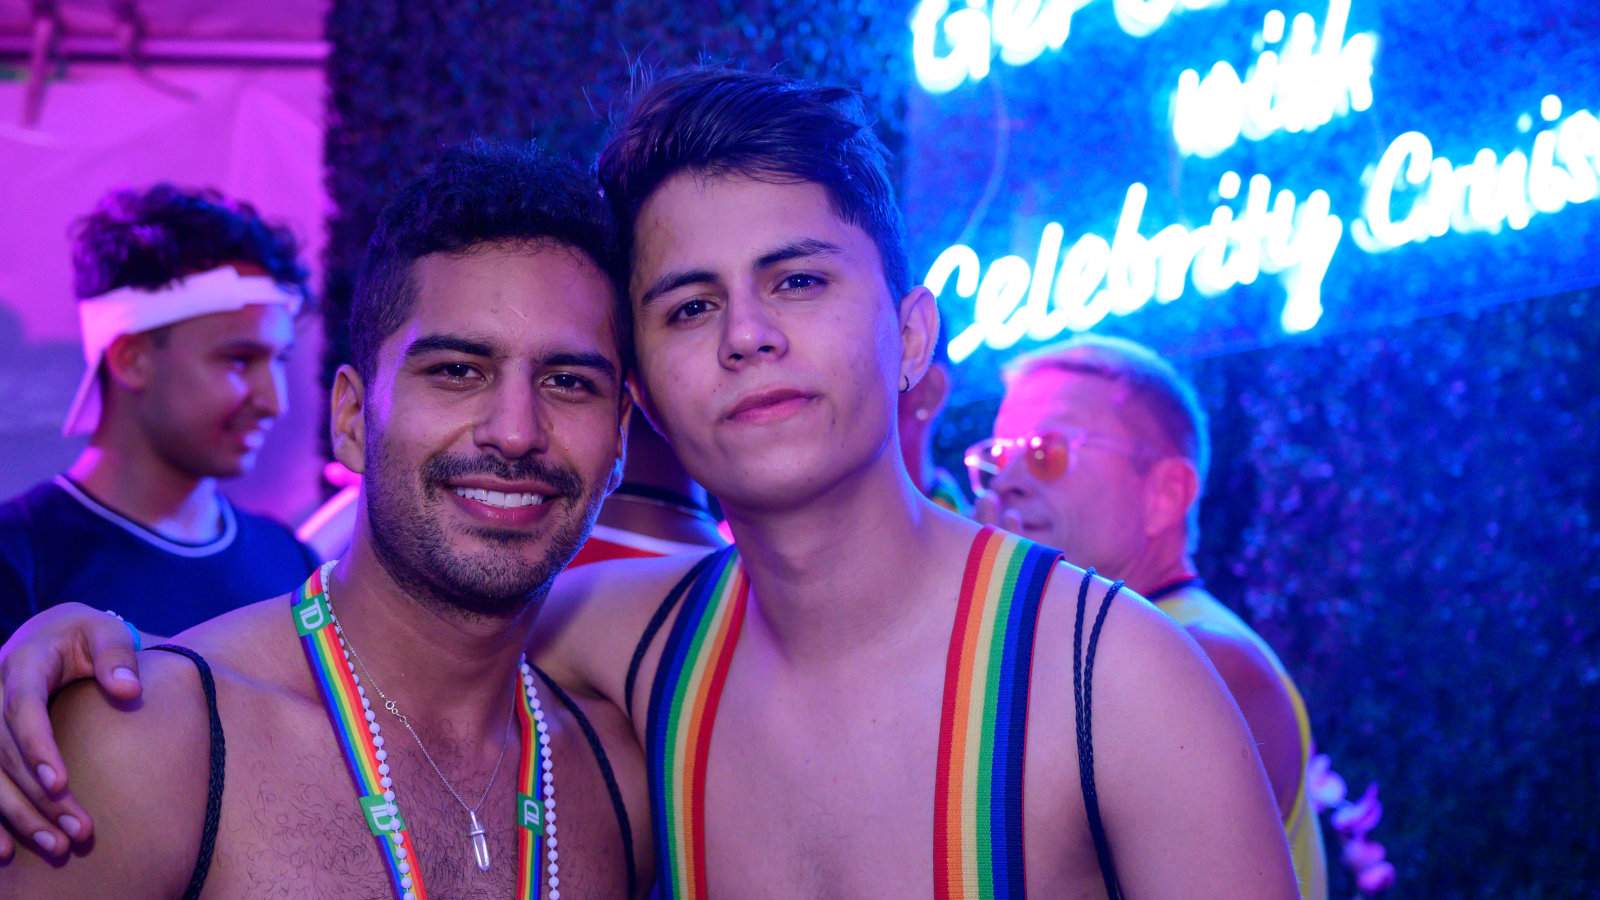 Miami Beach Pride Festival is a fun event, and even more so if you join the celebrity cruises VIP Lounge!